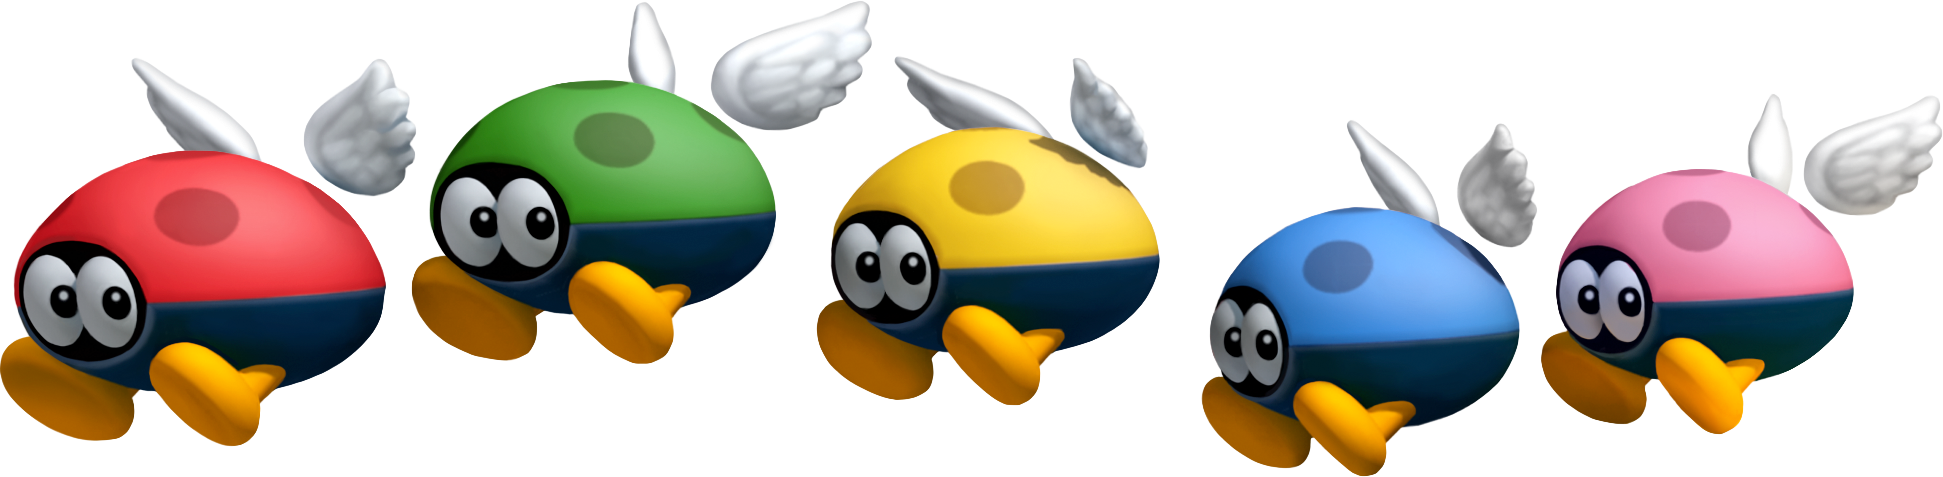 Colorful Flying Animated Characters PNG image